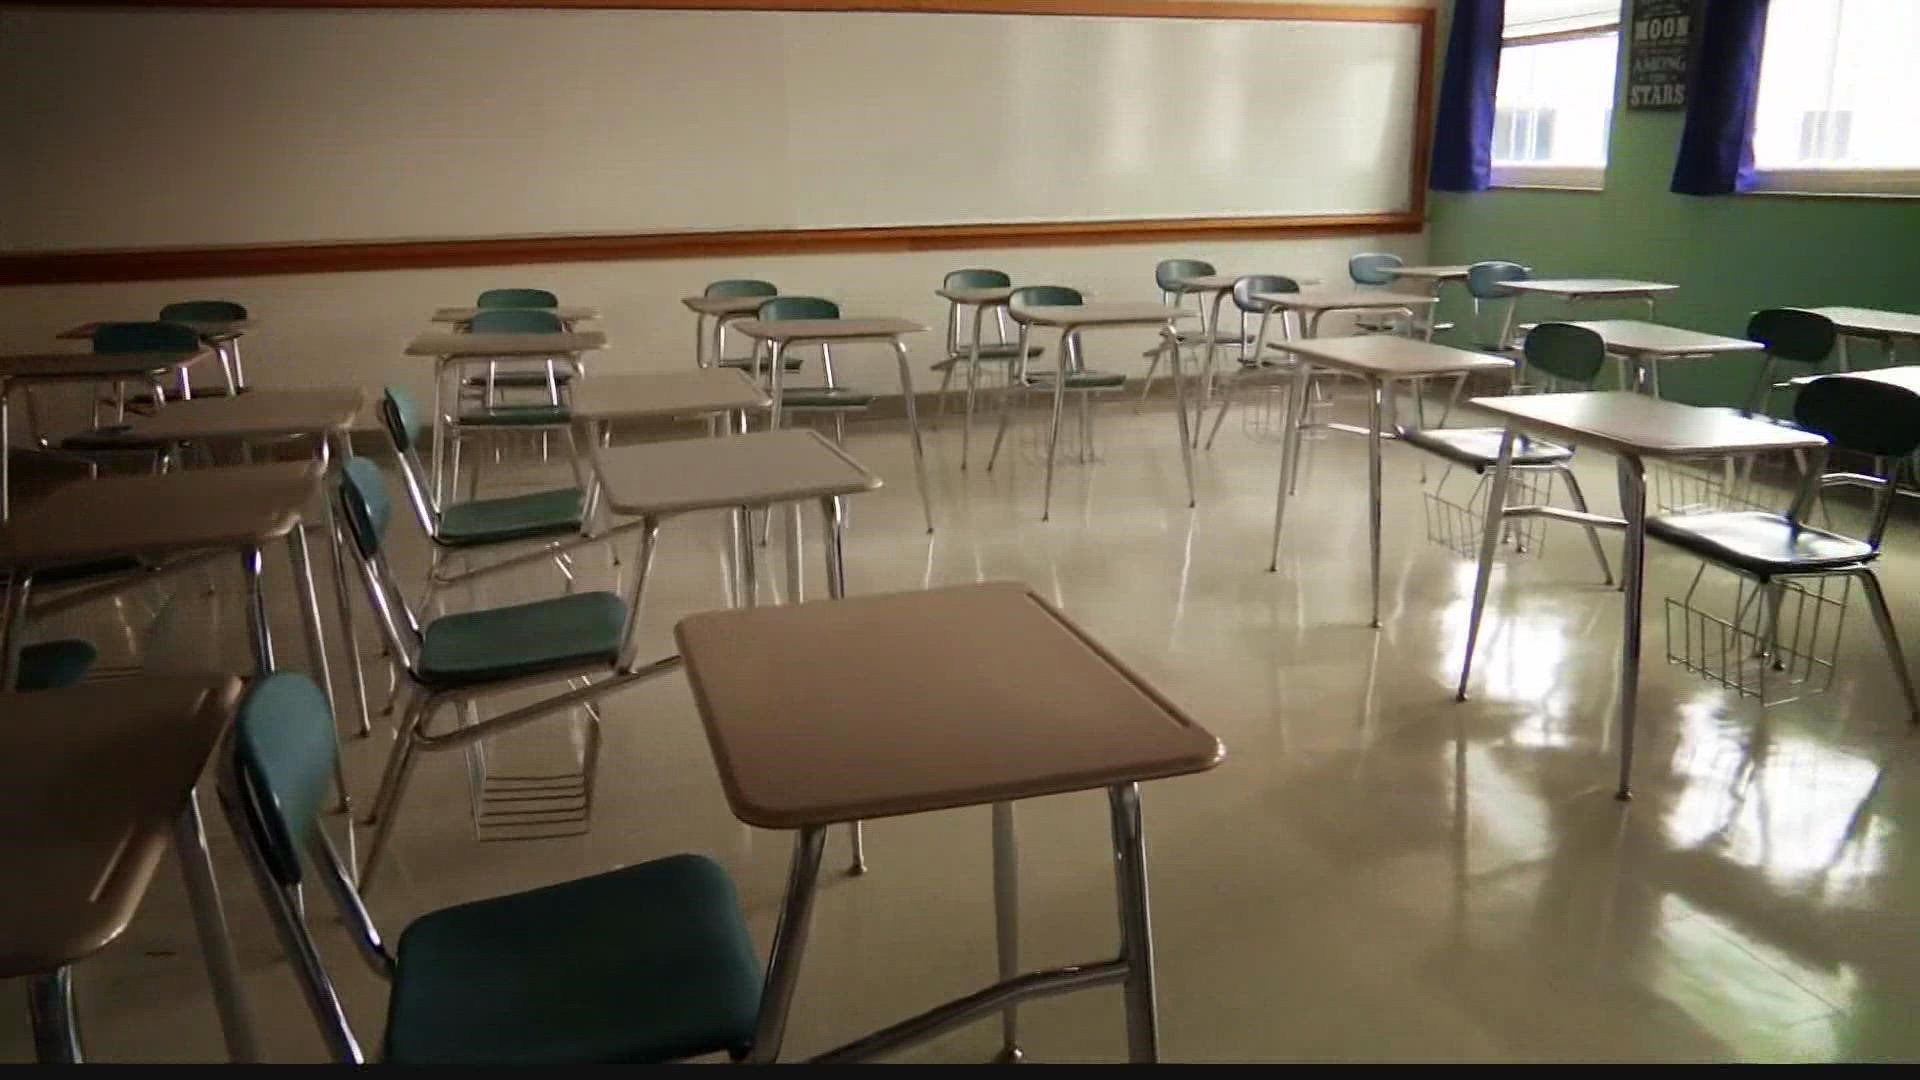 A controversial bill that restricts the way teachers discuss topics on race is once again up for debate. Teachers say the bill is about politics and hurts students.